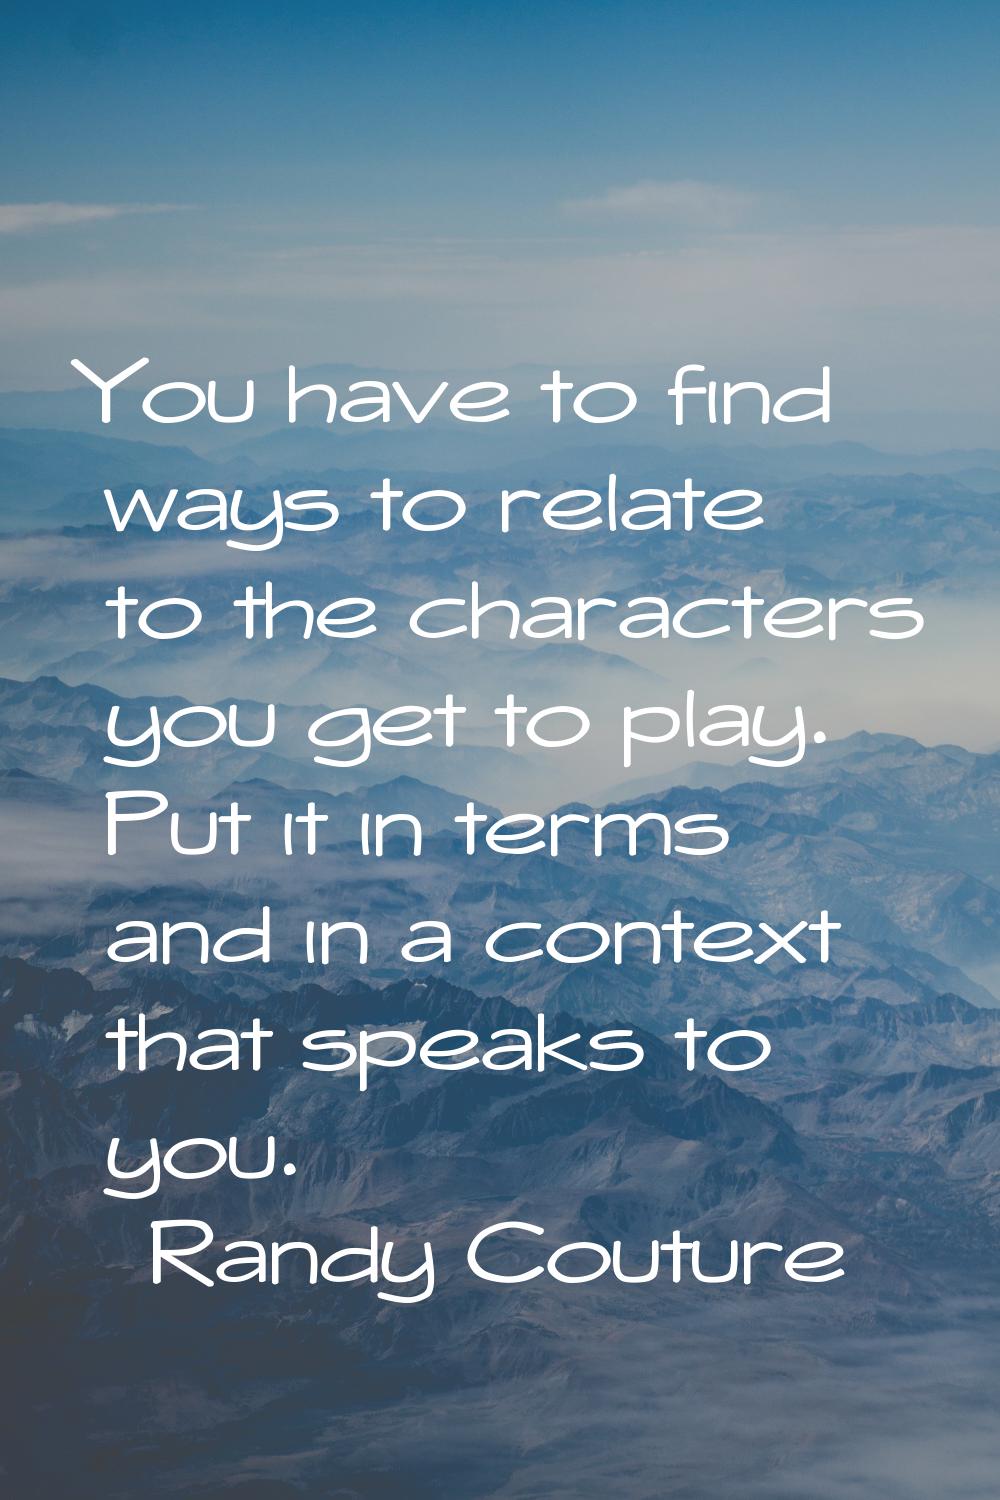 You have to find ways to relate to the characters you get to play. Put it in terms and in a context